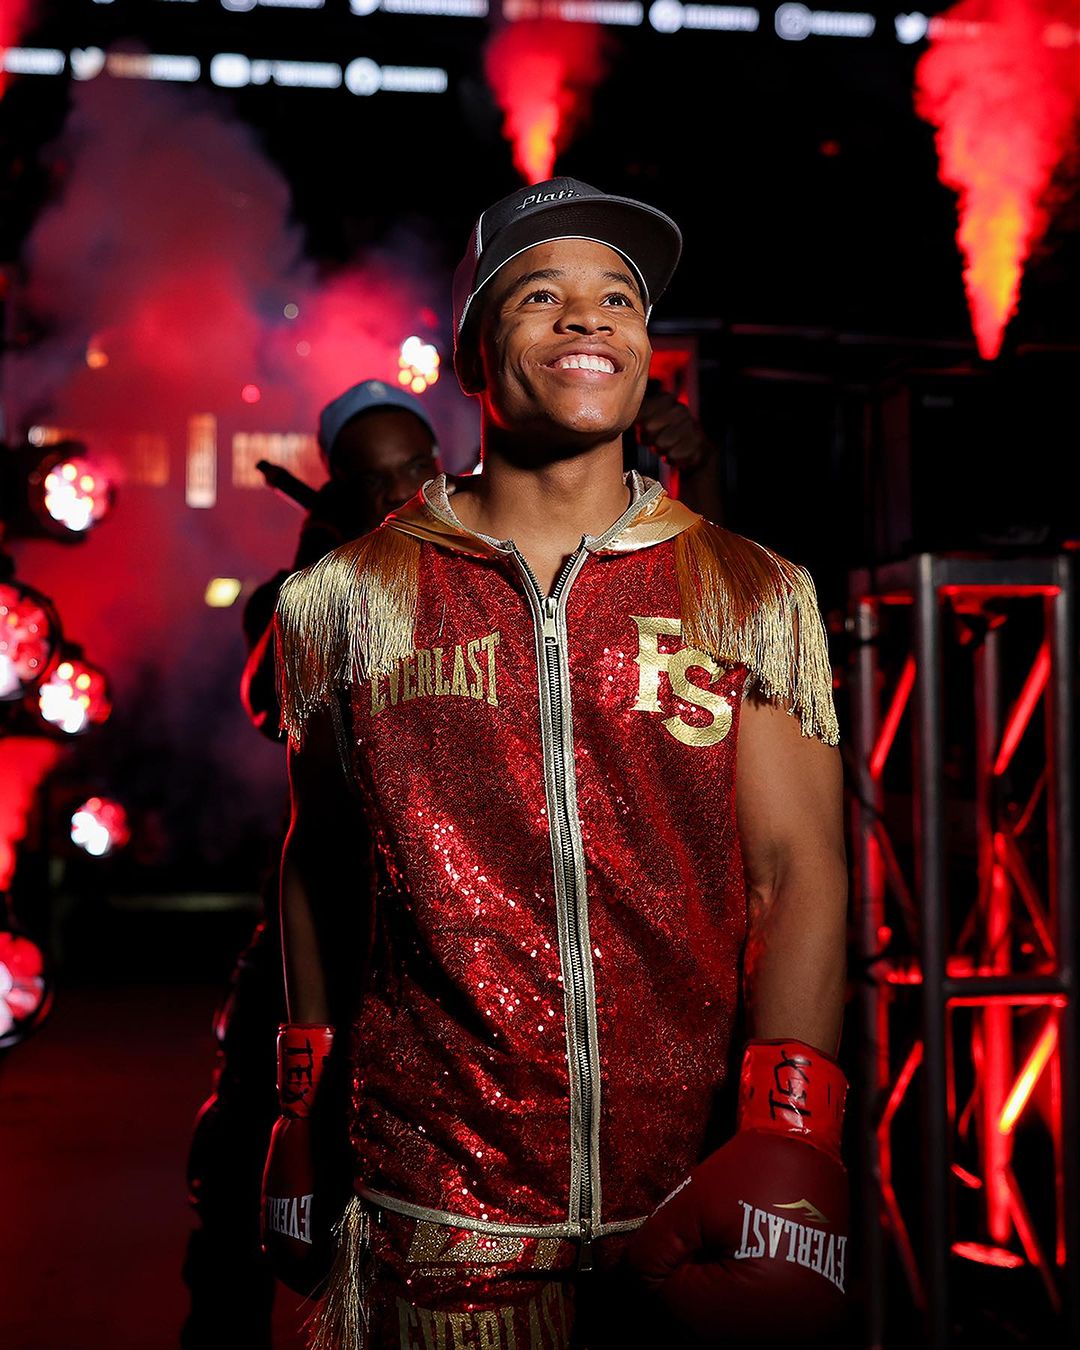 Floyd Dresses In A Red Glittered Outfit With Cap And Completes His Look With A Dazzling Smile